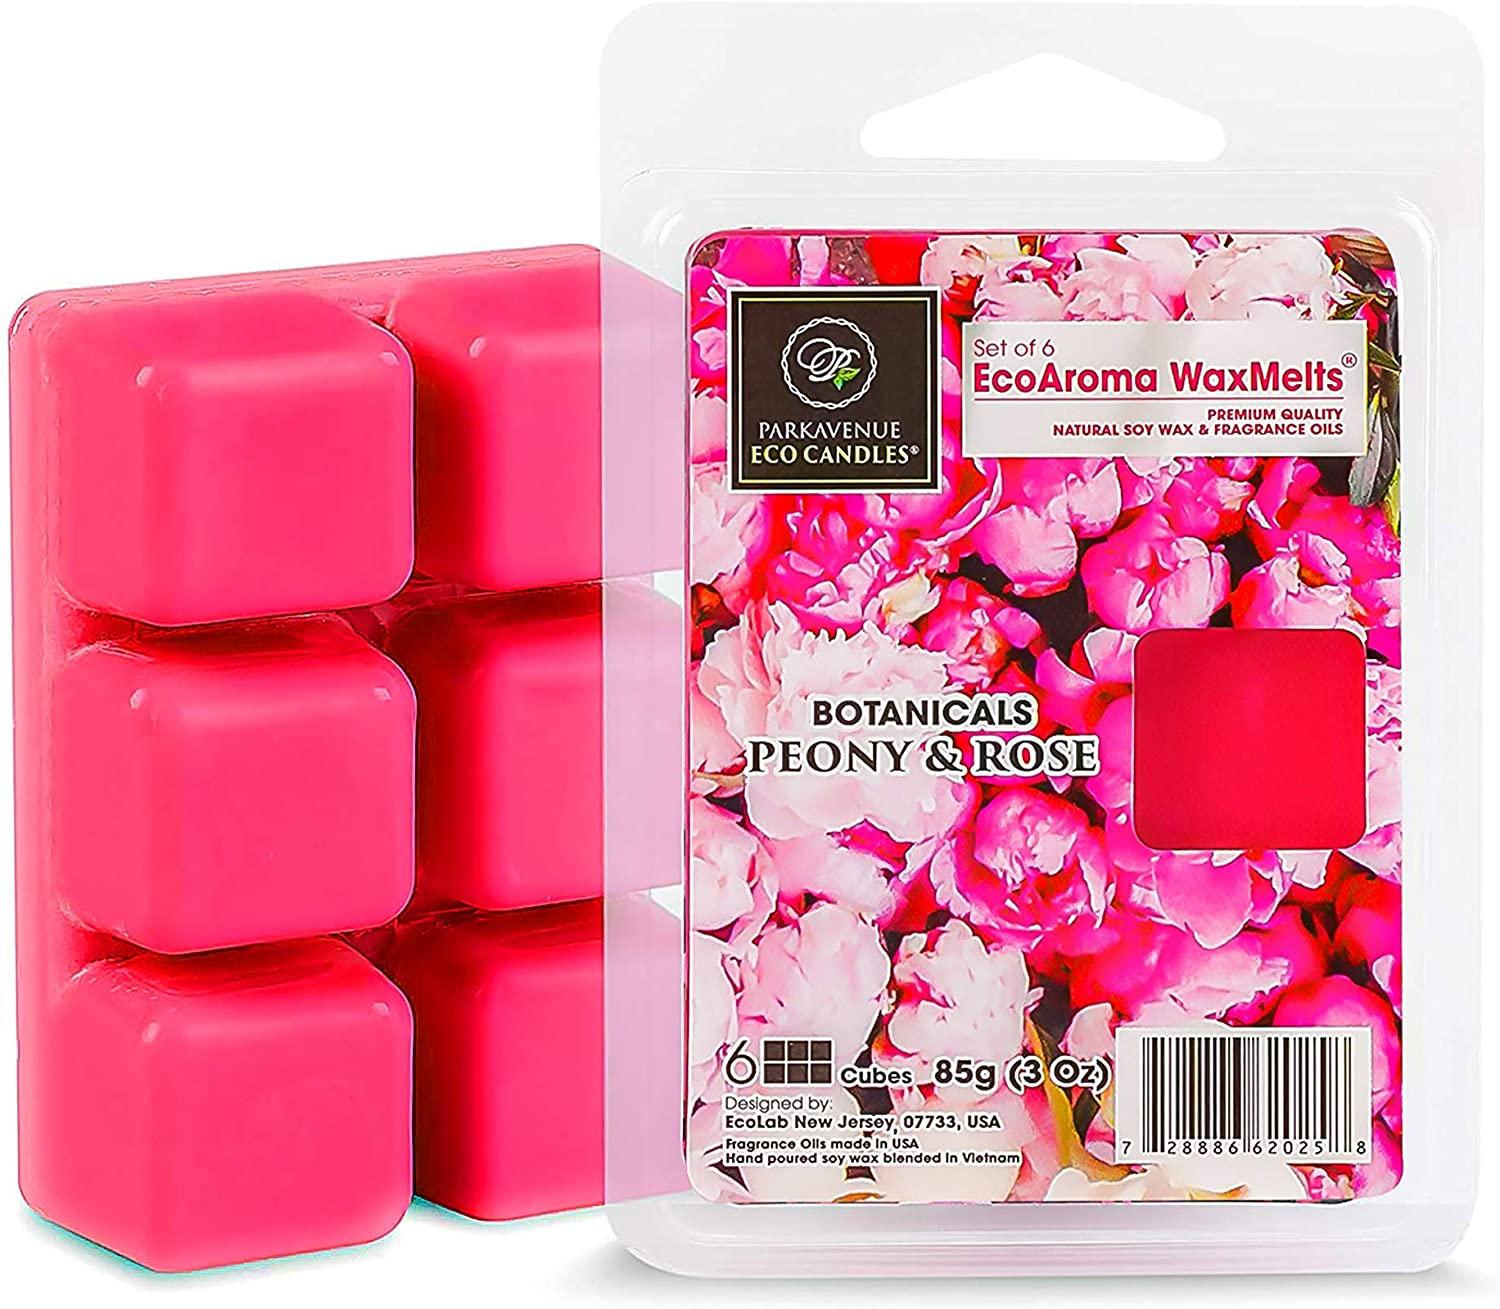 MAKE YOUR OWN WAX CUBES (FLOWERS) FOR A LOT CHEAPER THAN SCENTSY!